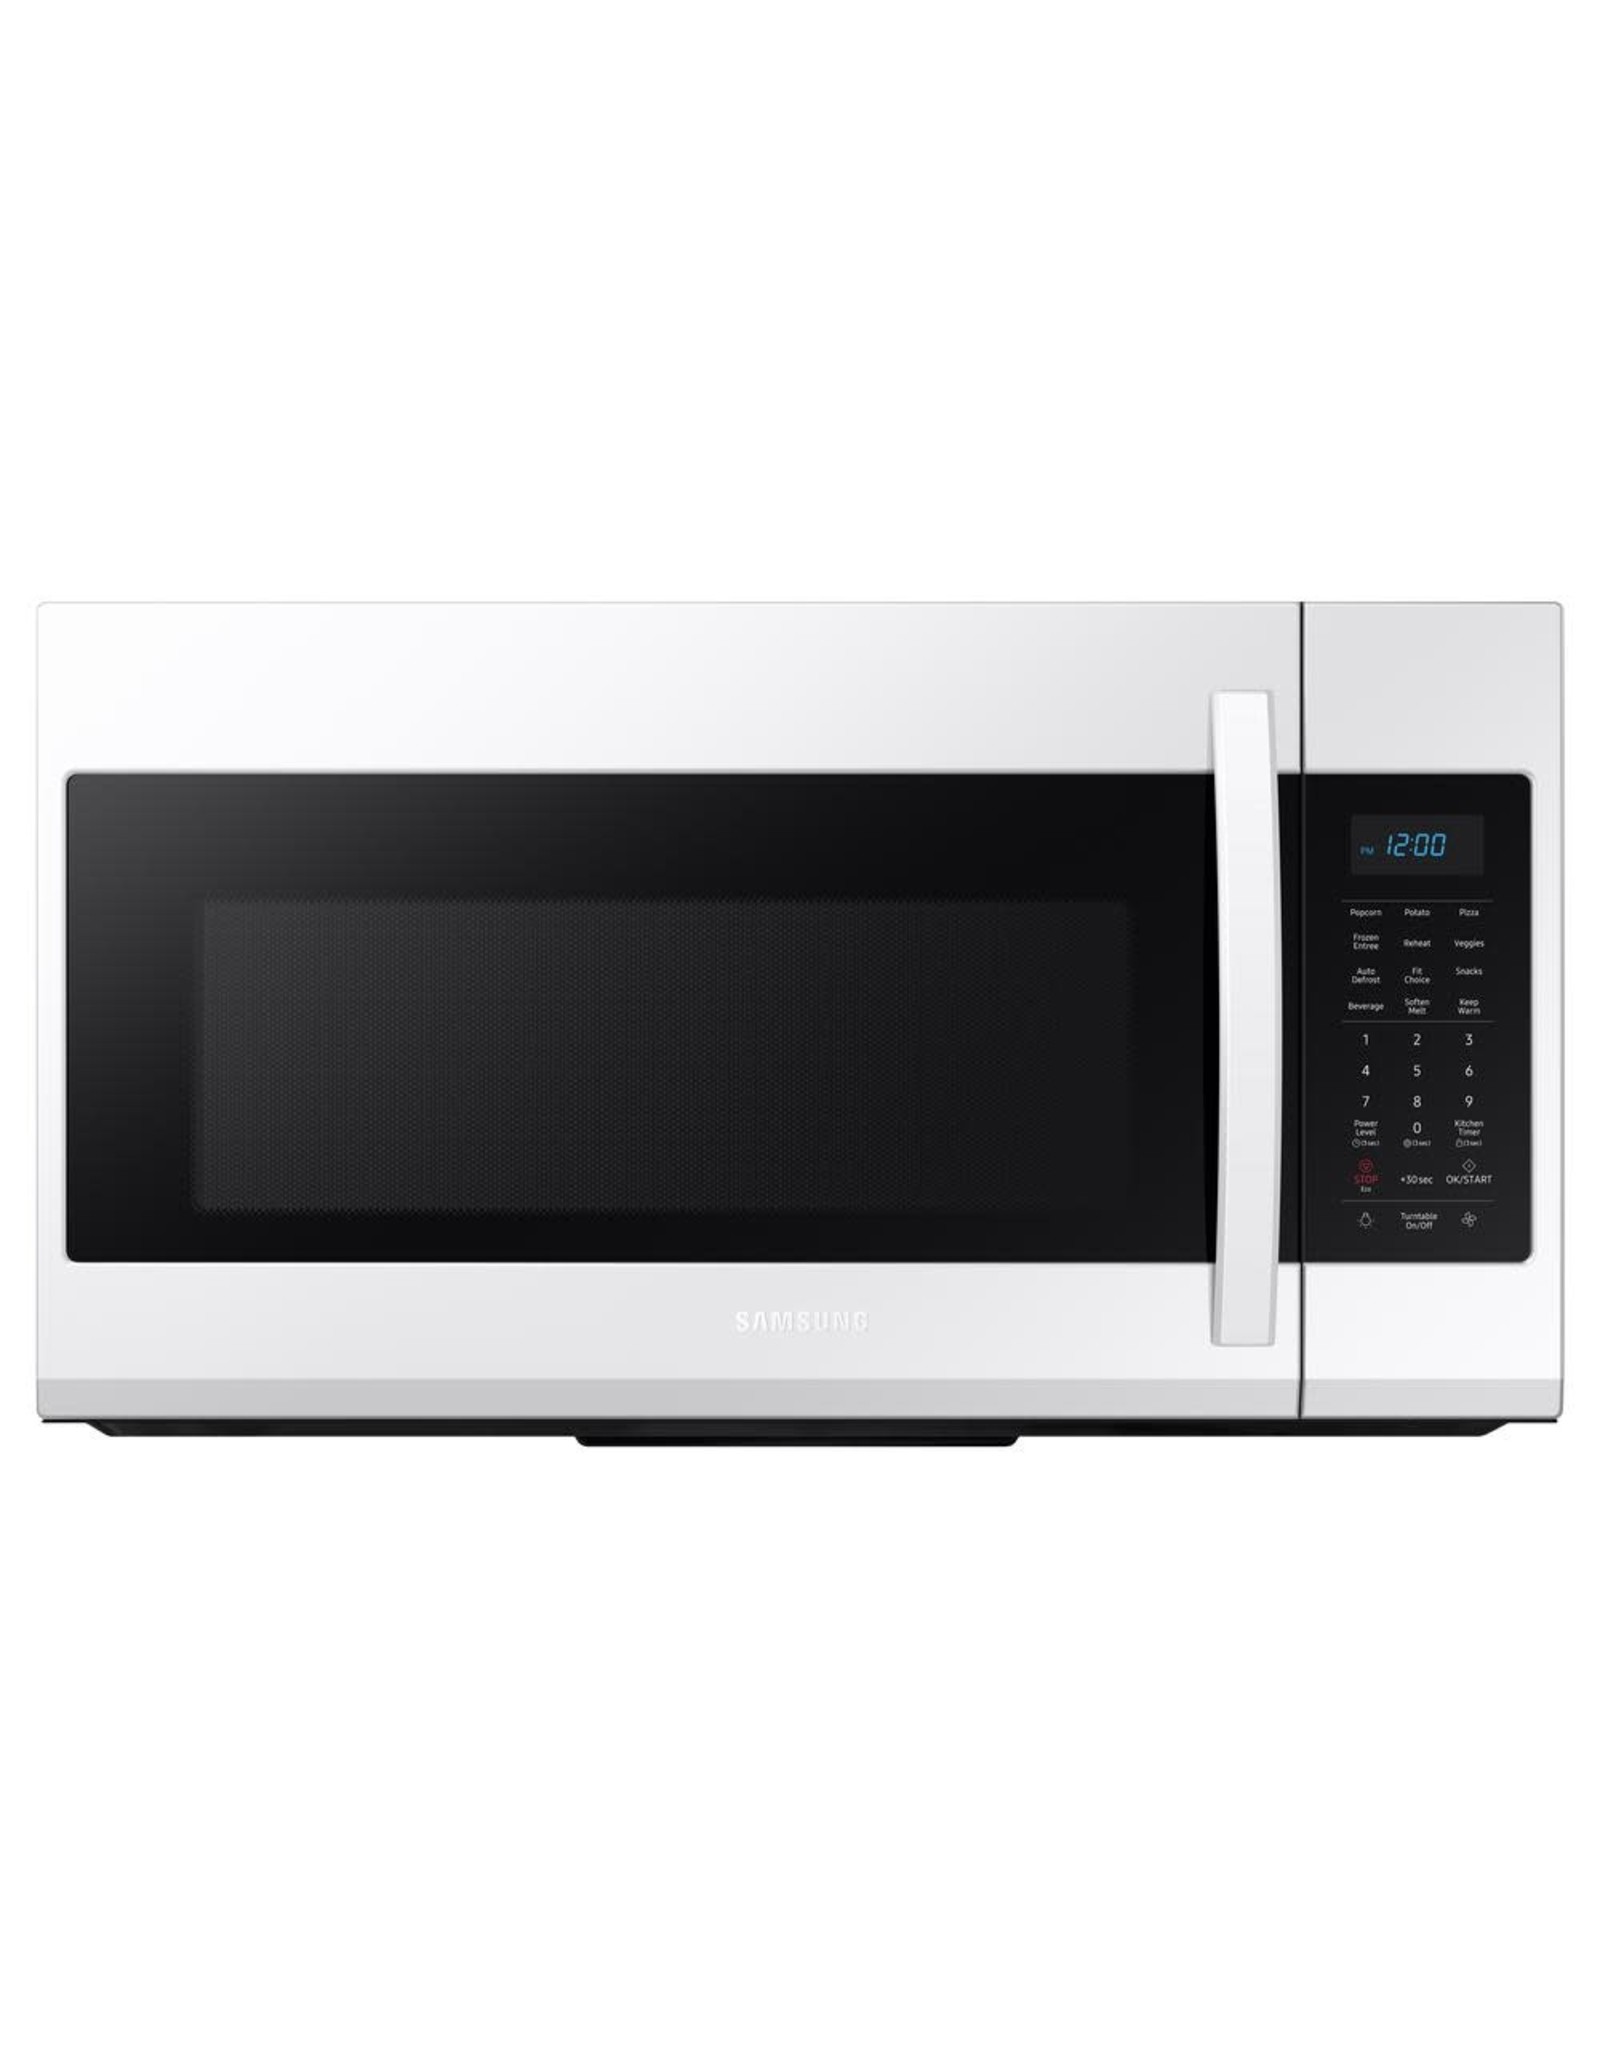 SAMSUNG ME19R7041FW Samsung 30 in. 1.9 cu. ft. Over-the-Range Microwave in White